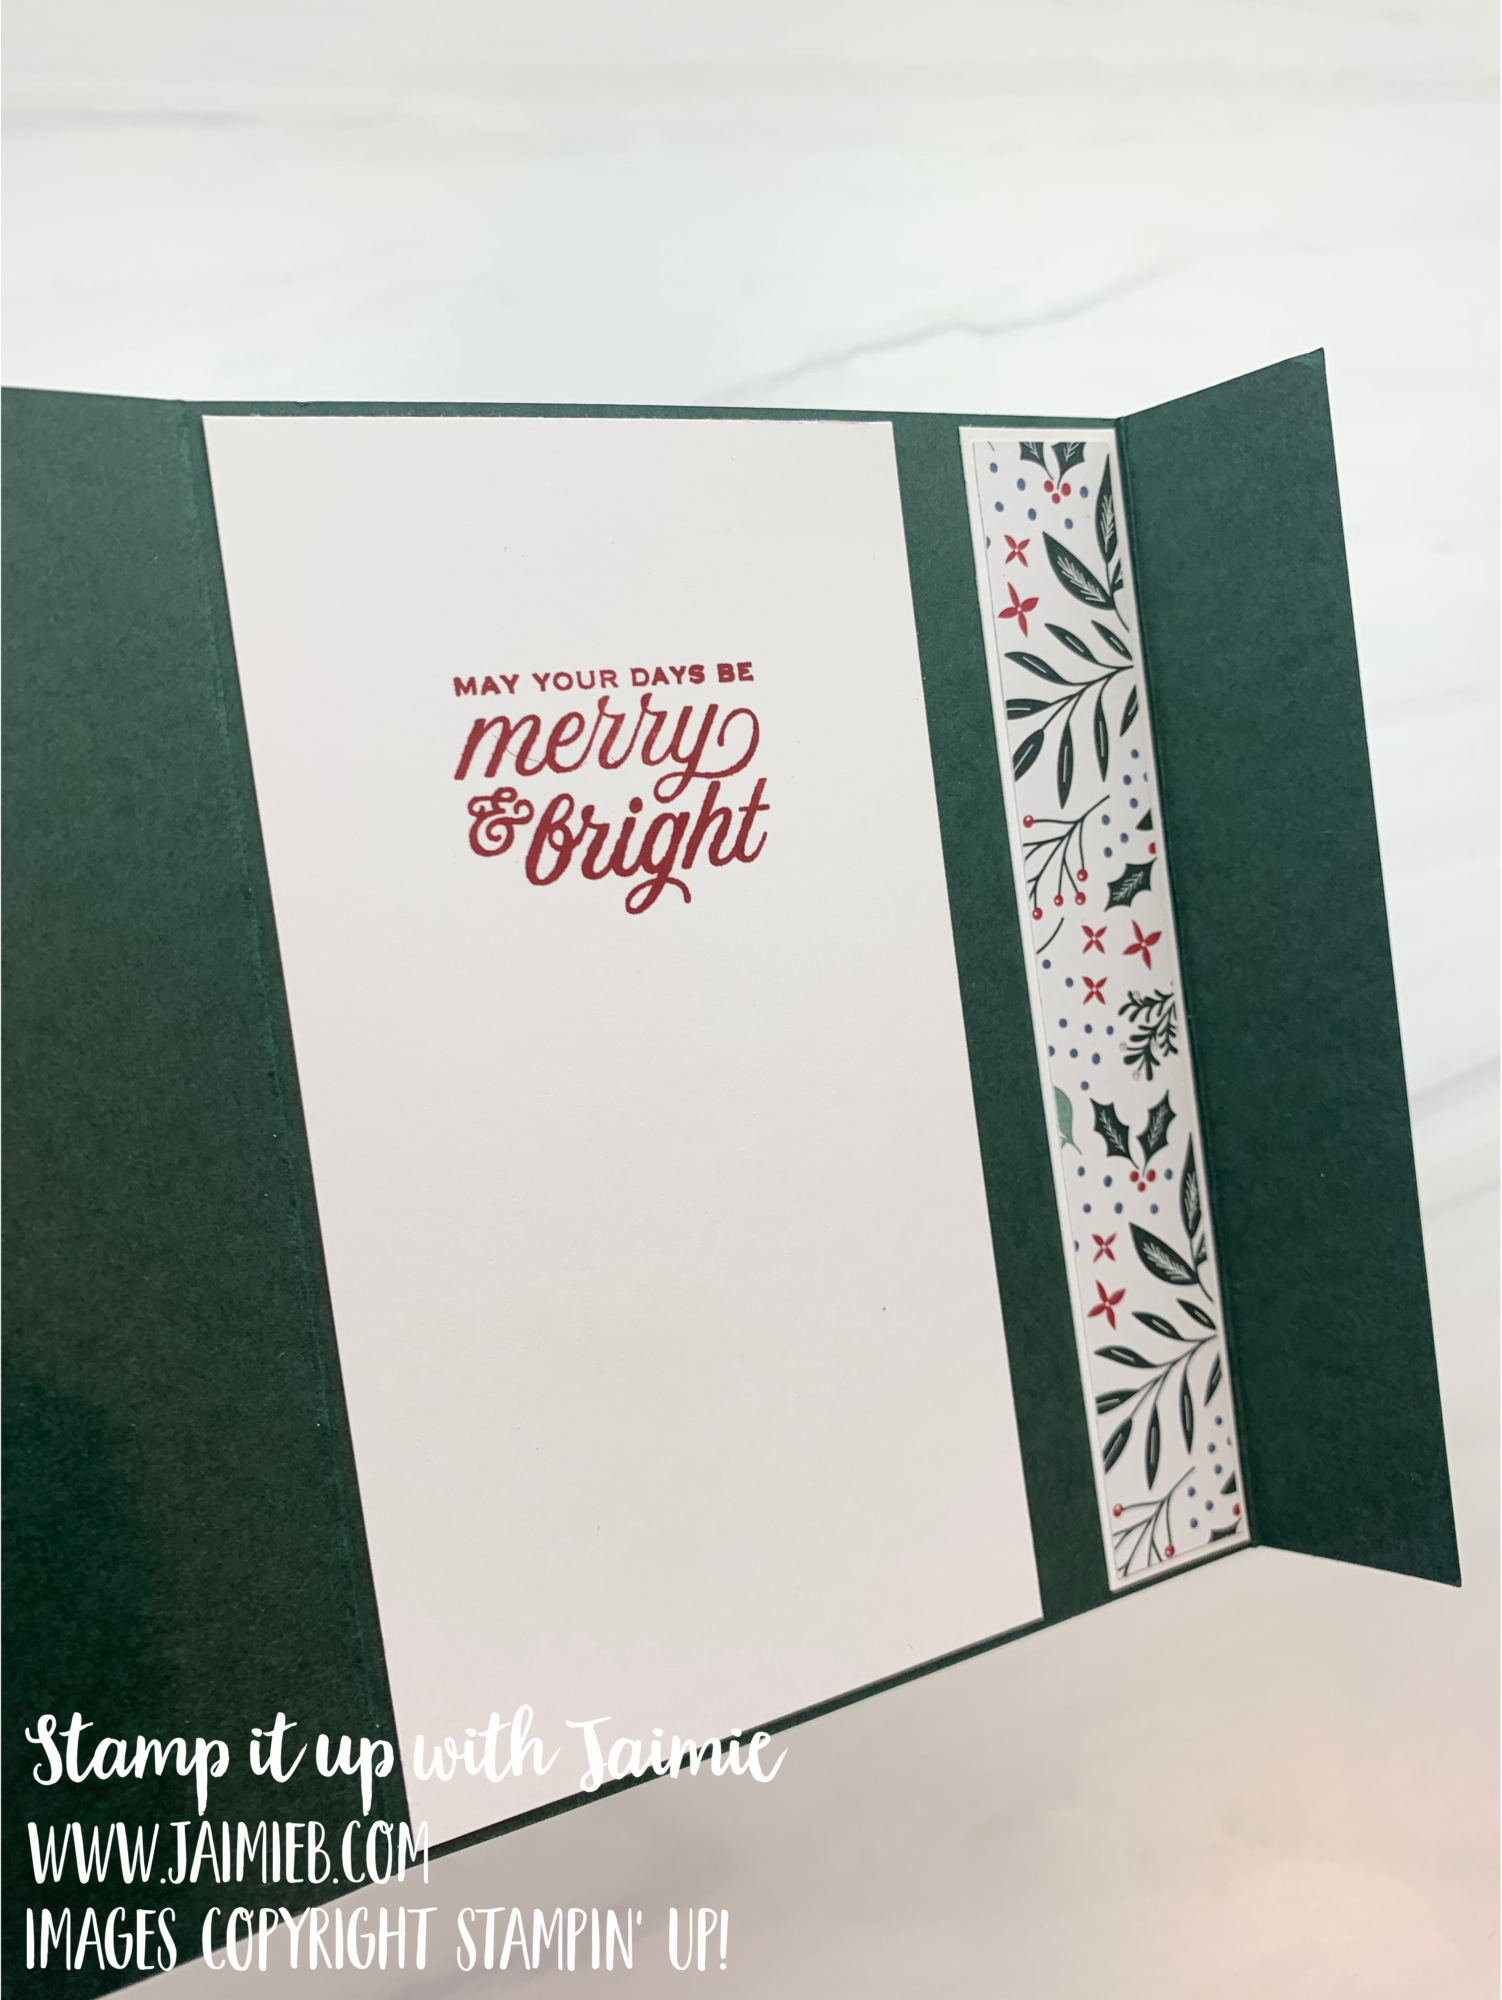 Stampin’ Up! Tidings & Trimmings Christmas Card